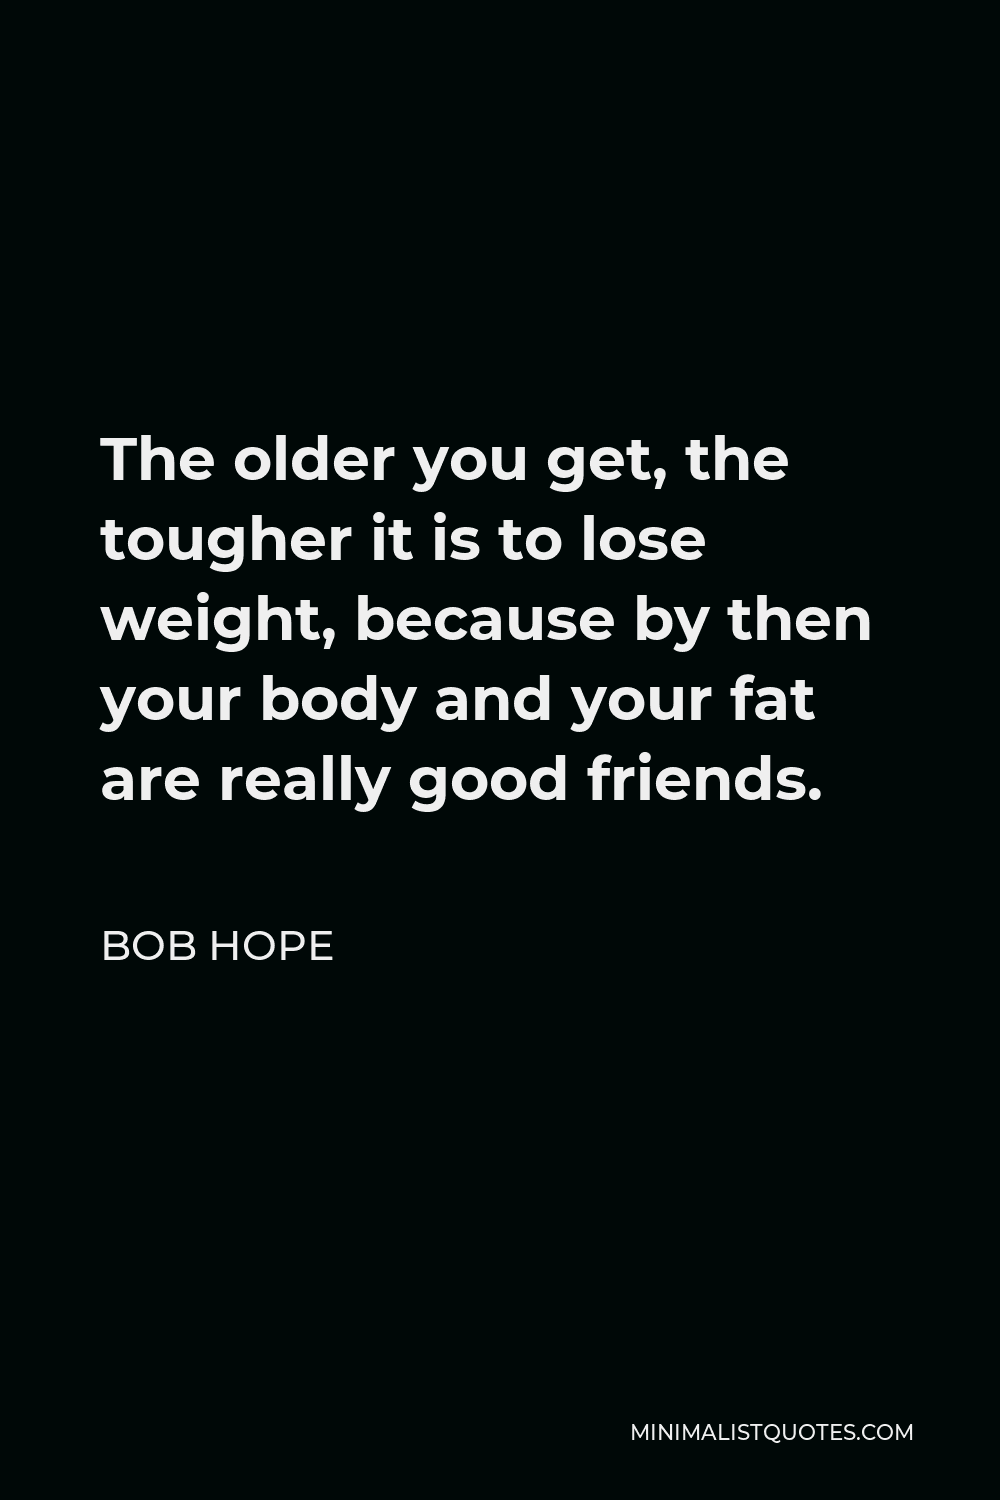 Bob Hope Quote: The older you get, the tougher it is to lose weight,  because by then your body and your fat are really good friends.